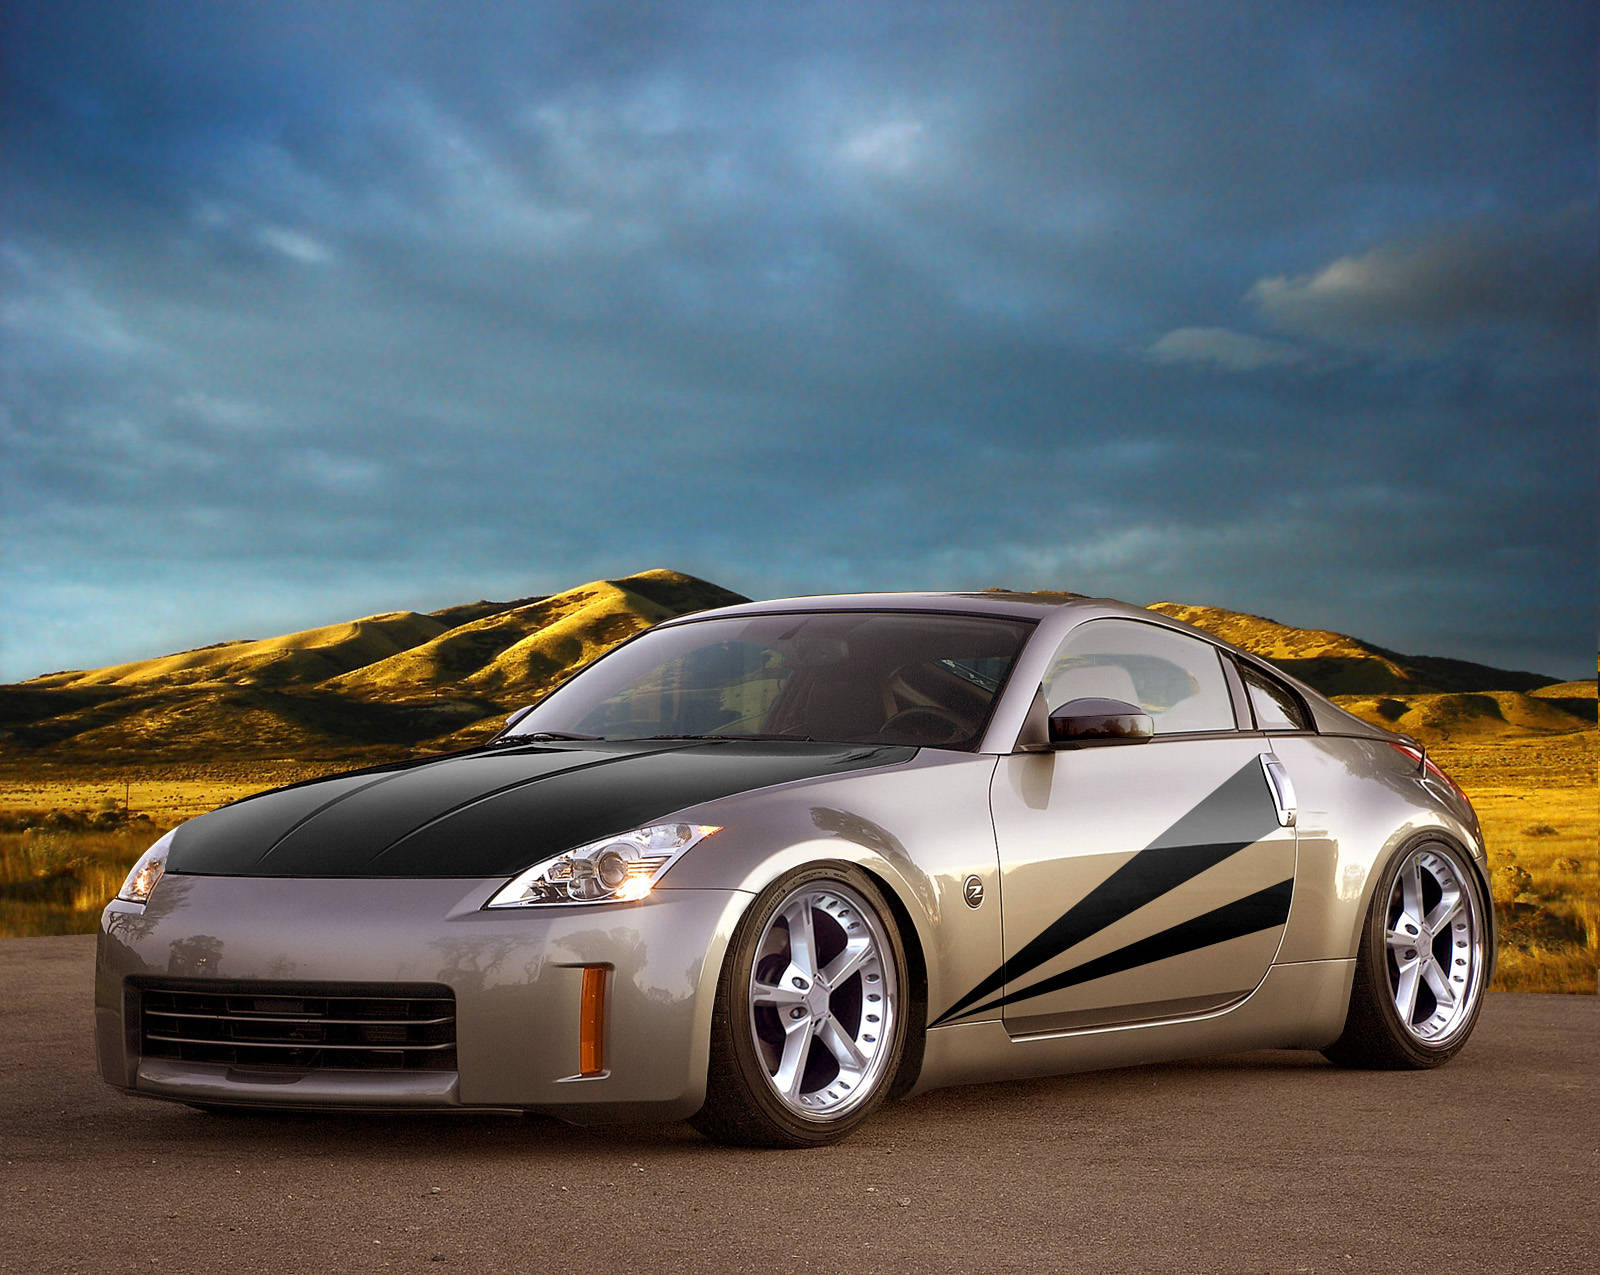 Get the wind in your hair with the sporty Nissan 350z Wallpaper